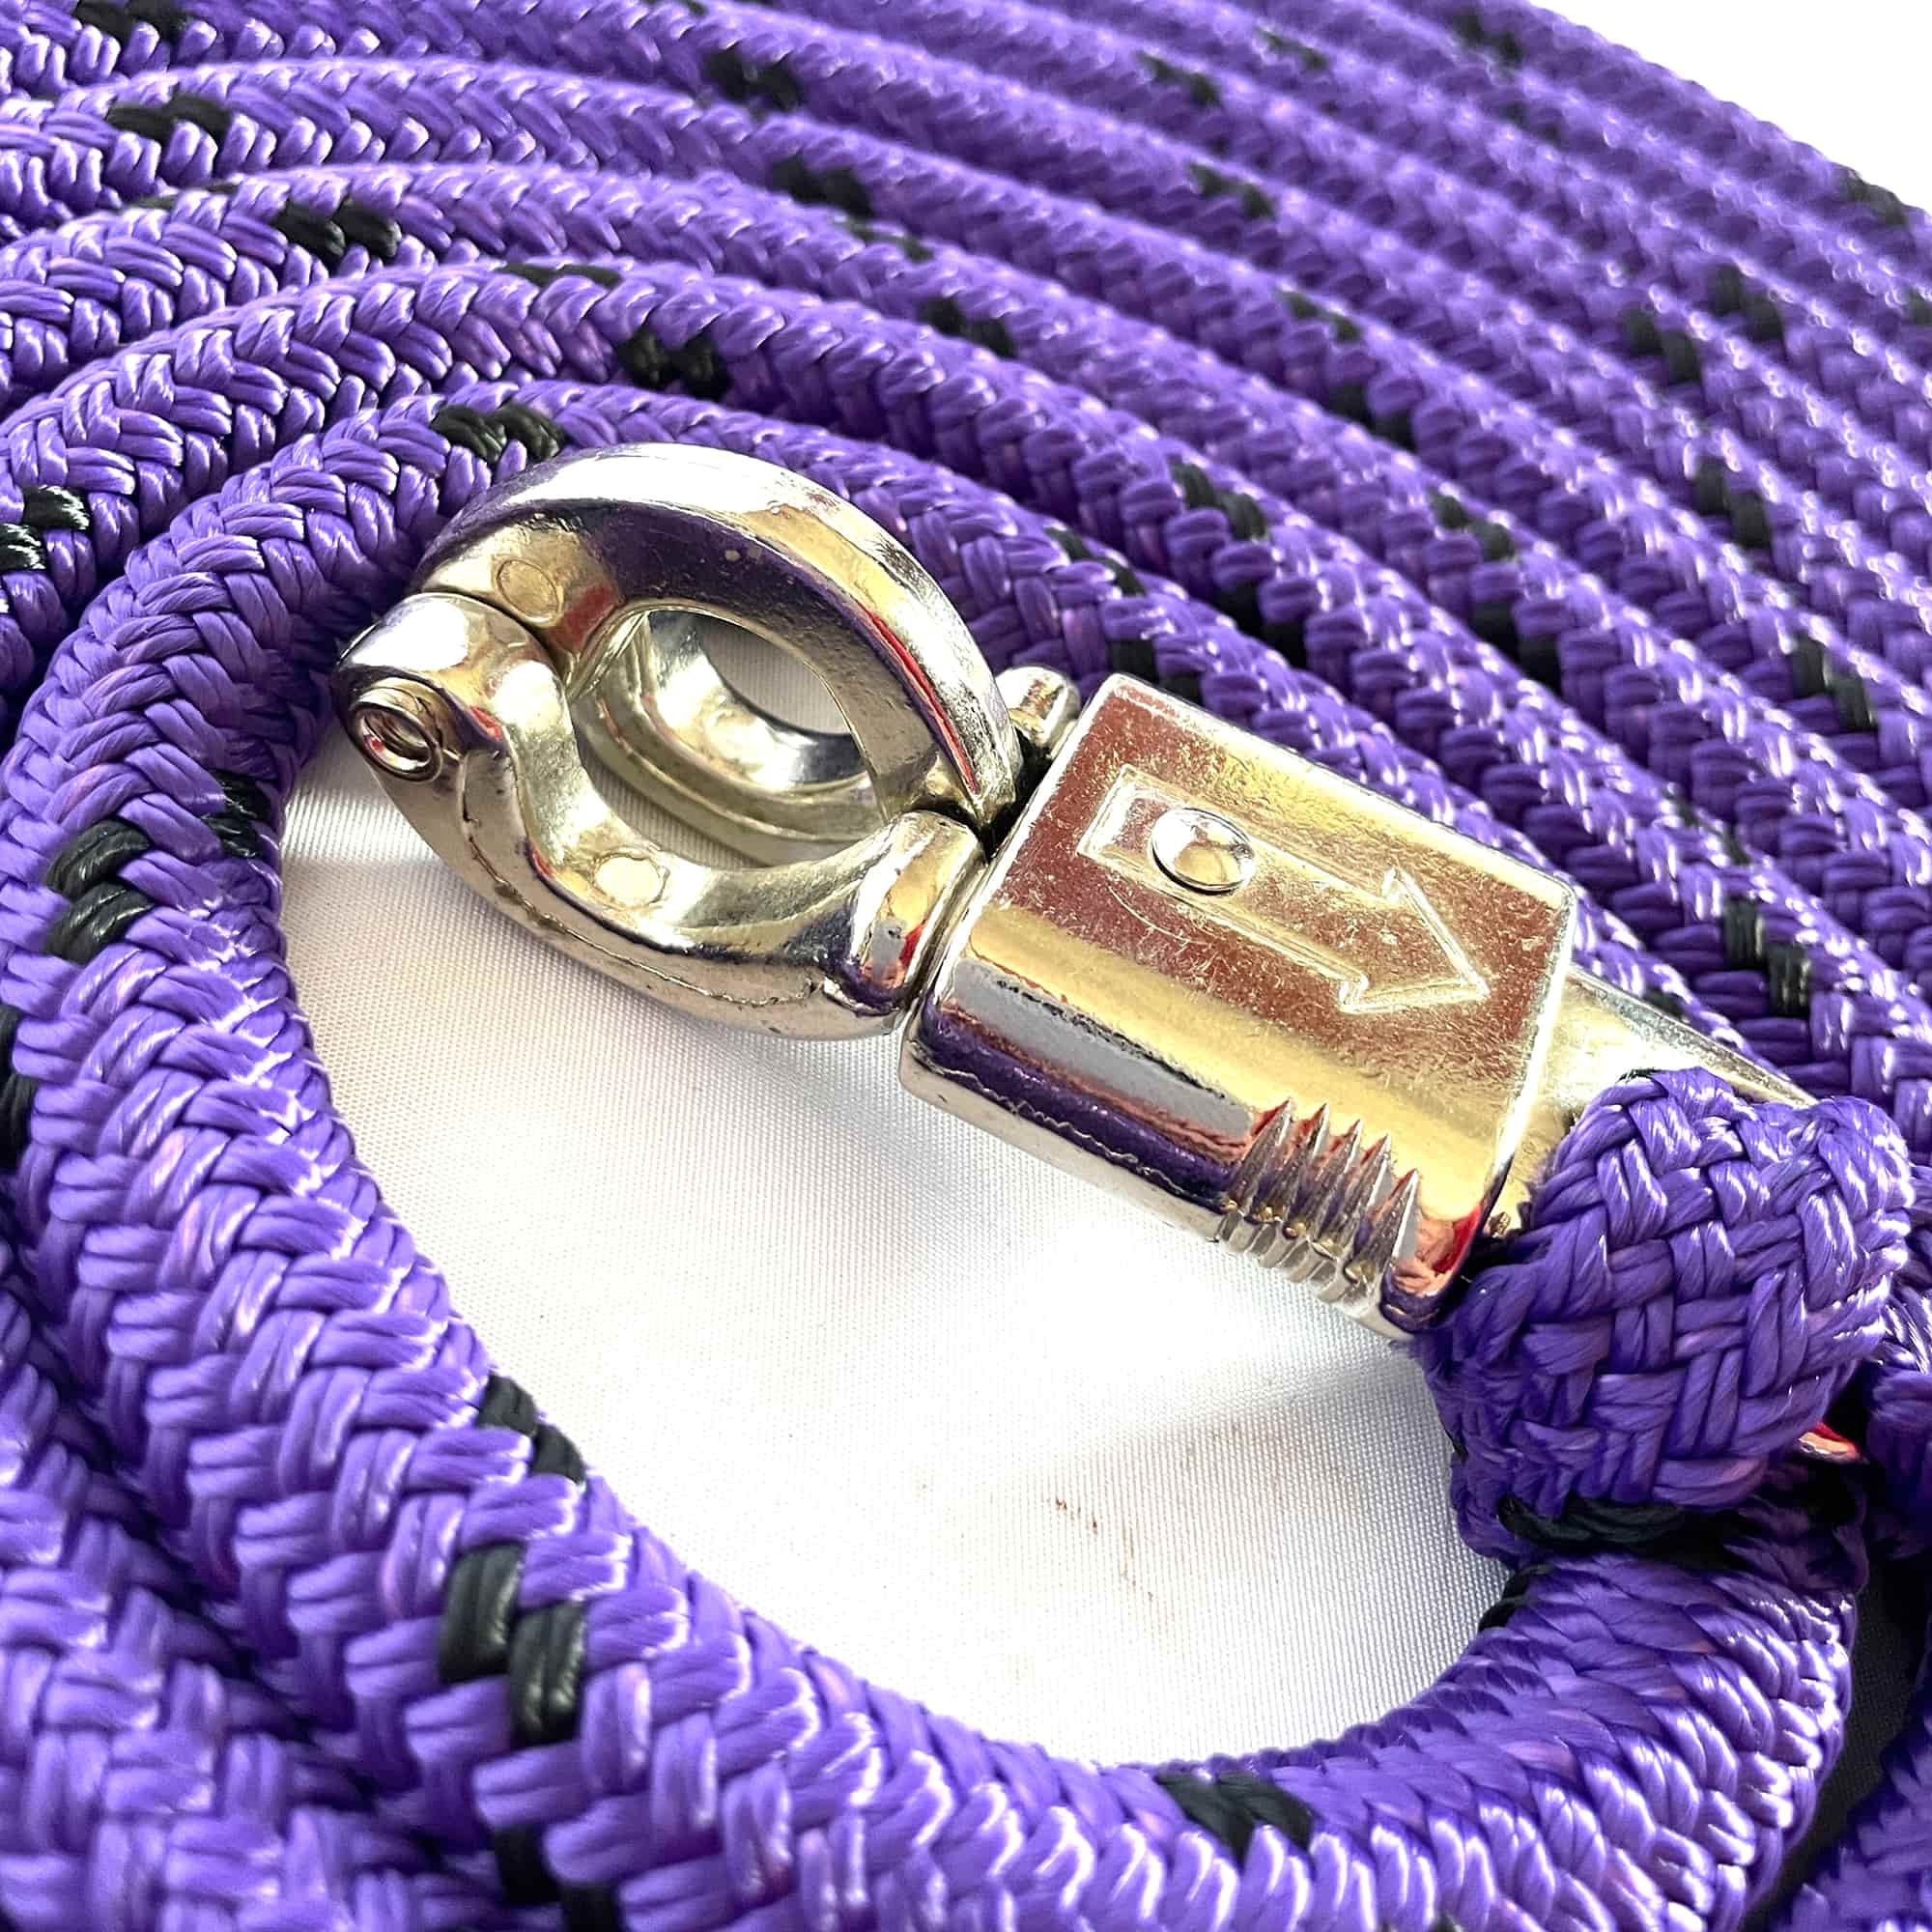 Purple with black fleck lead rope with quick release panic clip